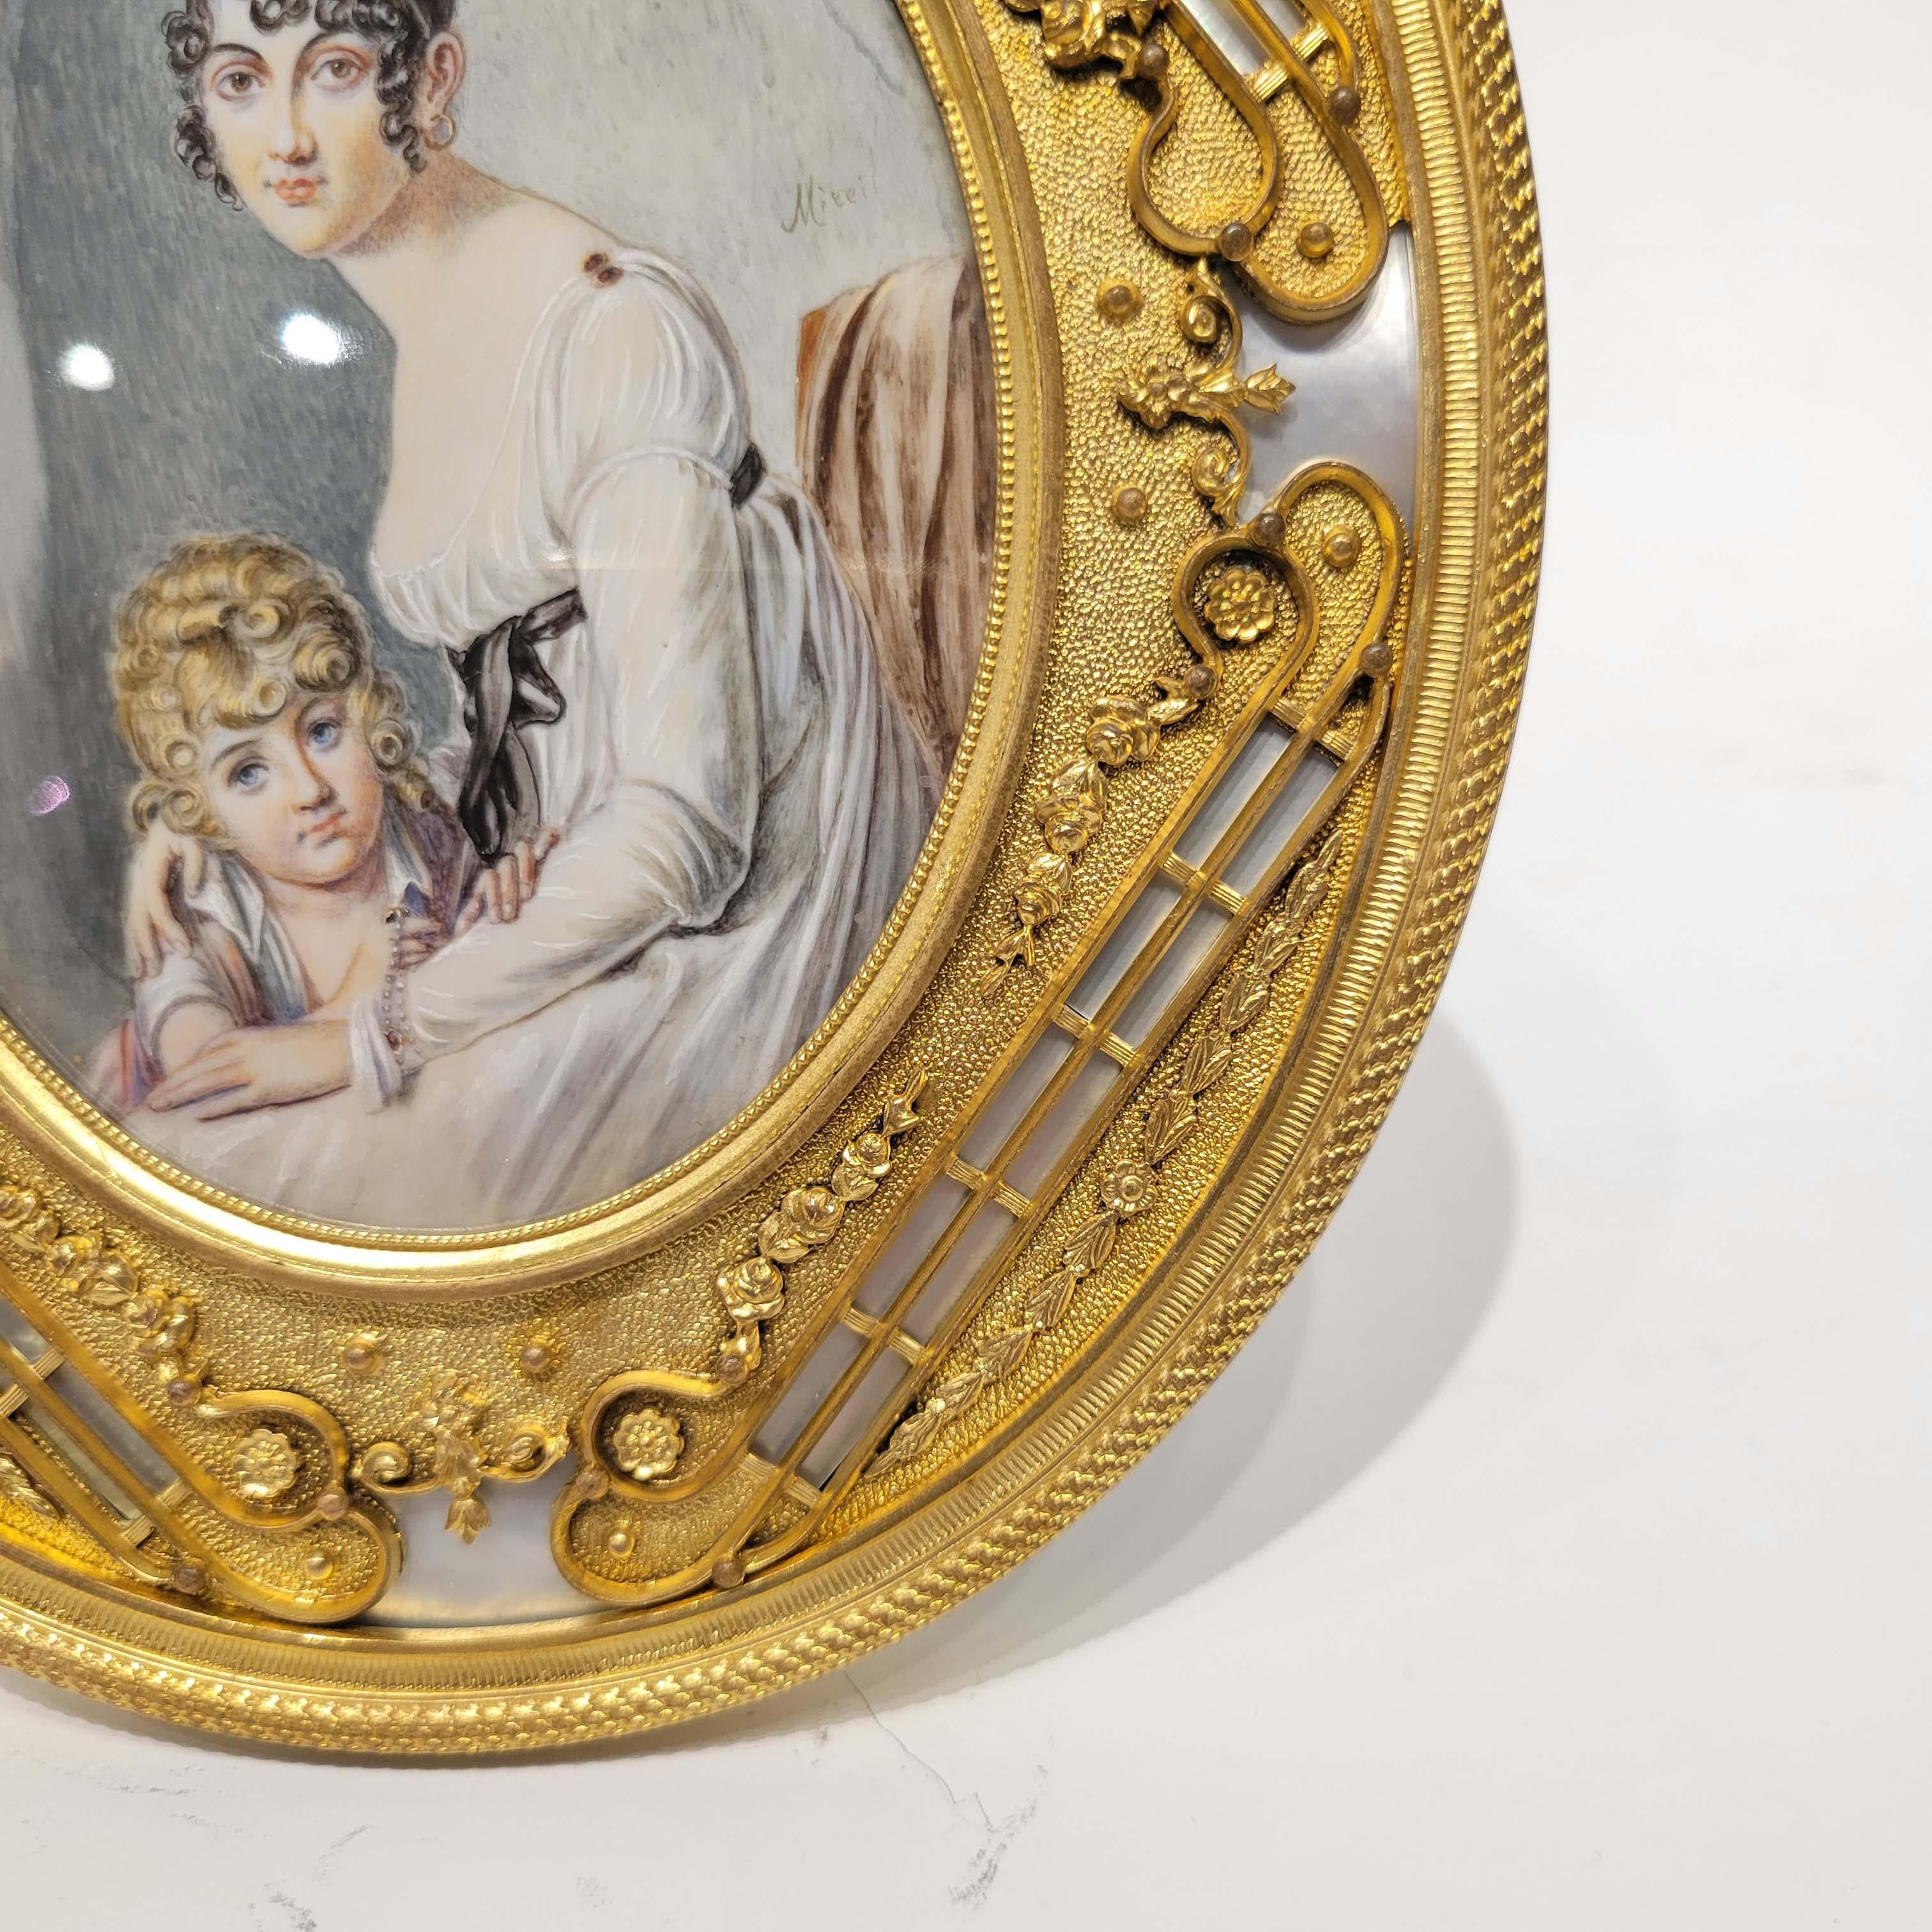 A magnificent signed antique hand painted miniature painting of mother and child in a wonderful gilt bronze frame inlayed with mother of pearl plaques. France, circa late 19th century.